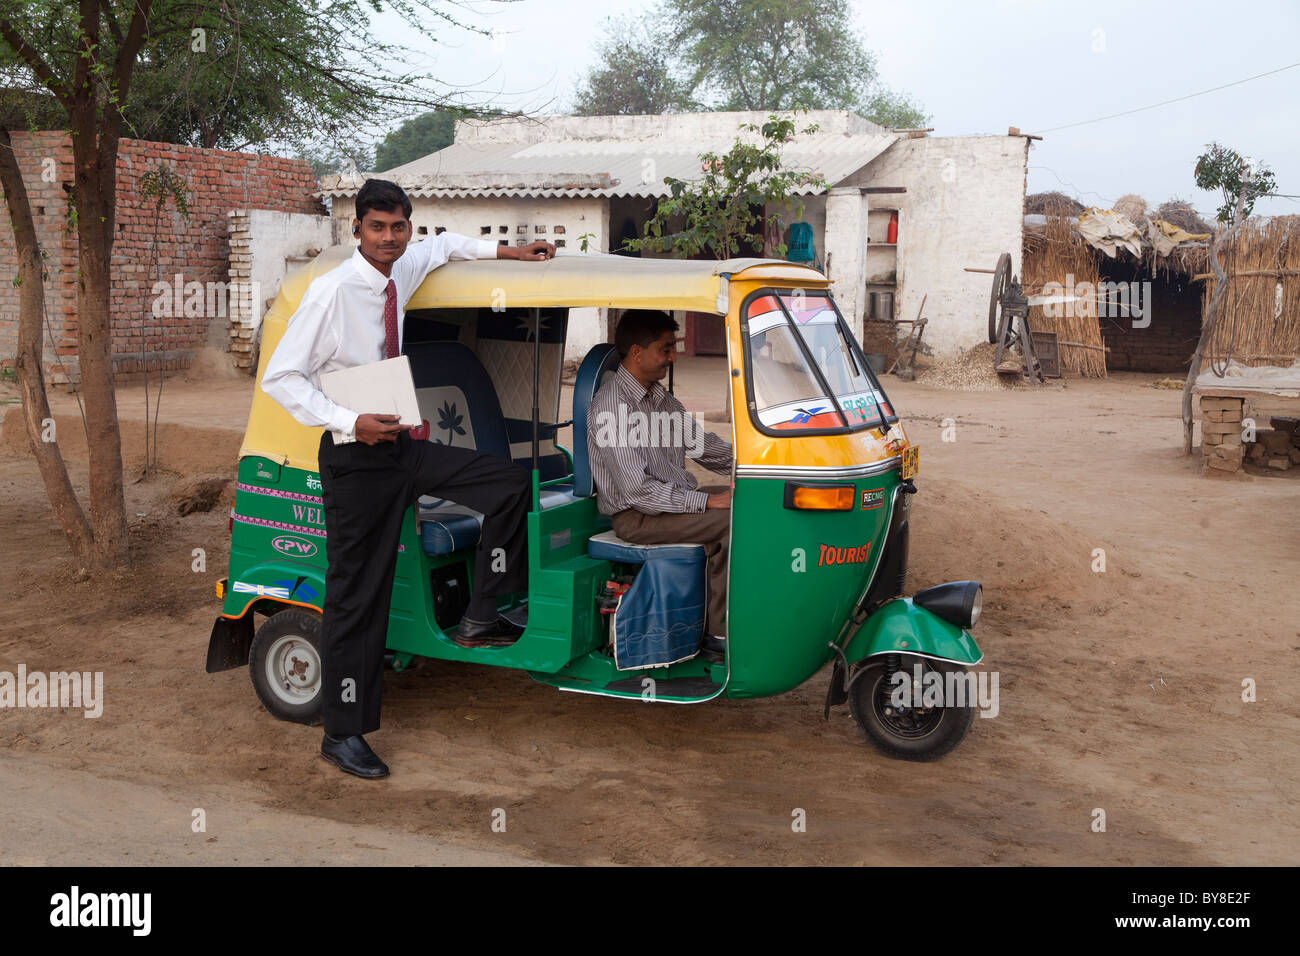 India, Uttar Pradesh, Agra, young businessman with laptop posing next to auto rickshaw on journey from home to work Stock Photo